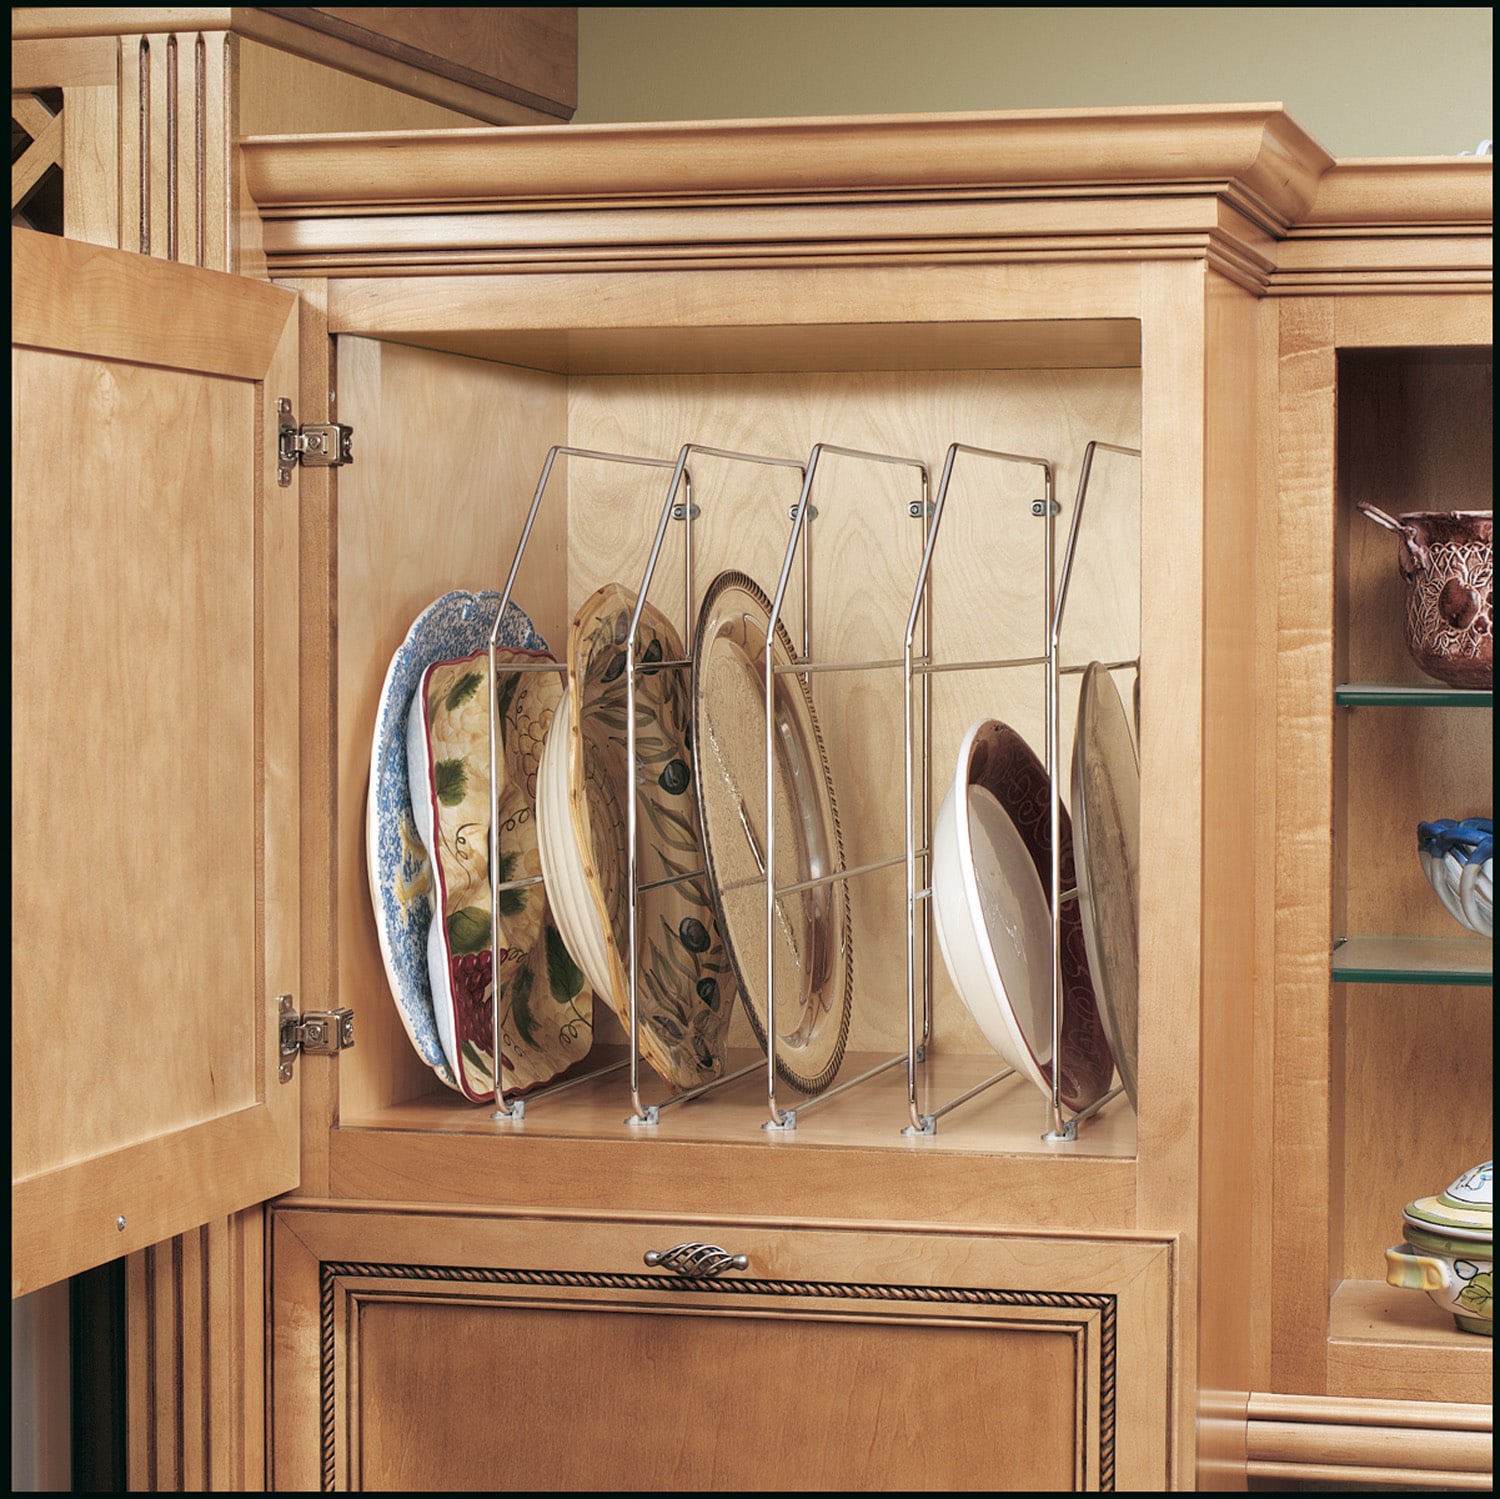 Diamond at Lowes - Organization - Tray Divider in Top Hinge Wall